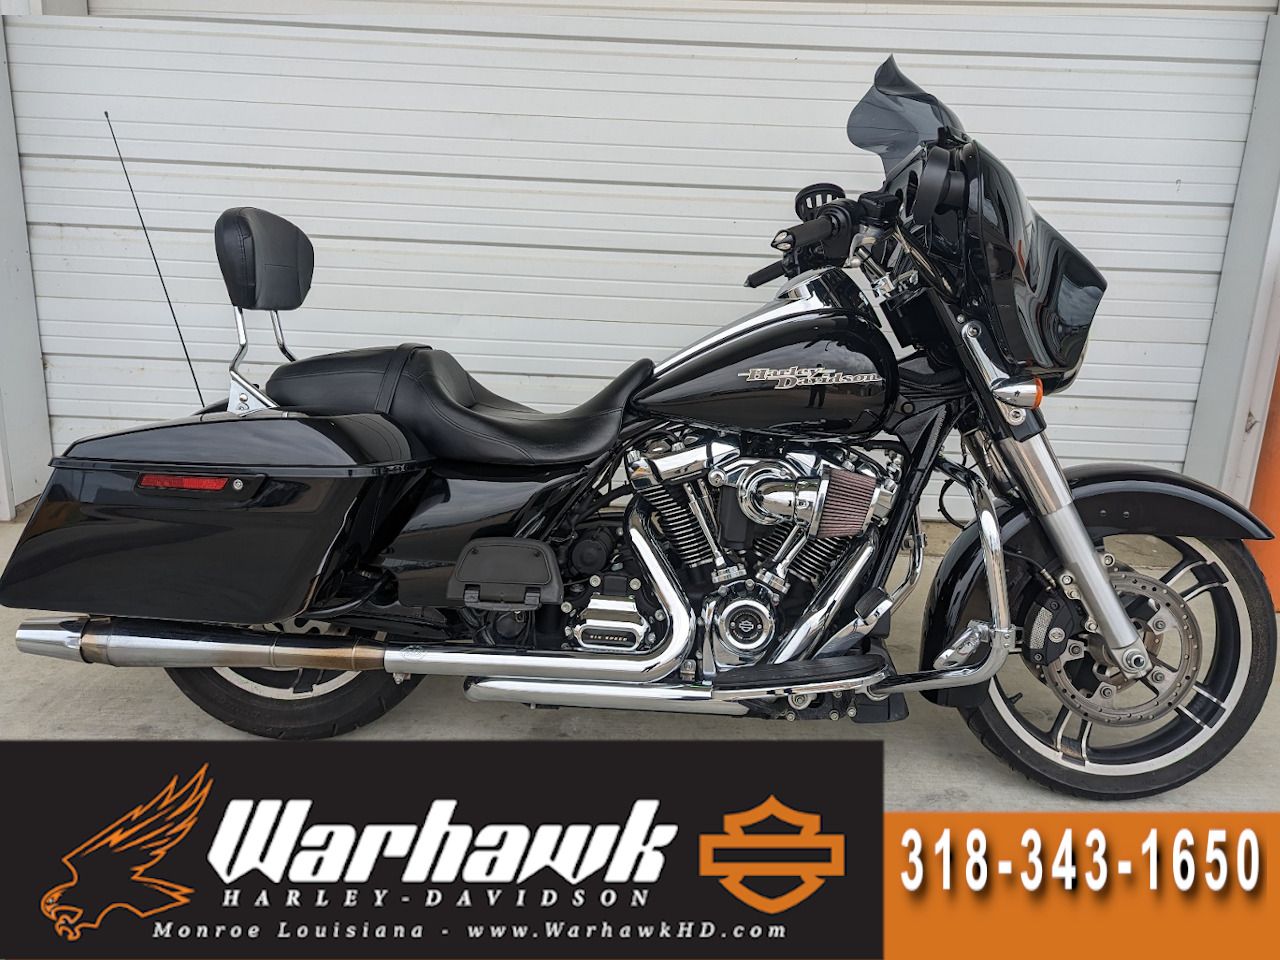 2017 harley davidson street glide special for sale near me - Photo 1